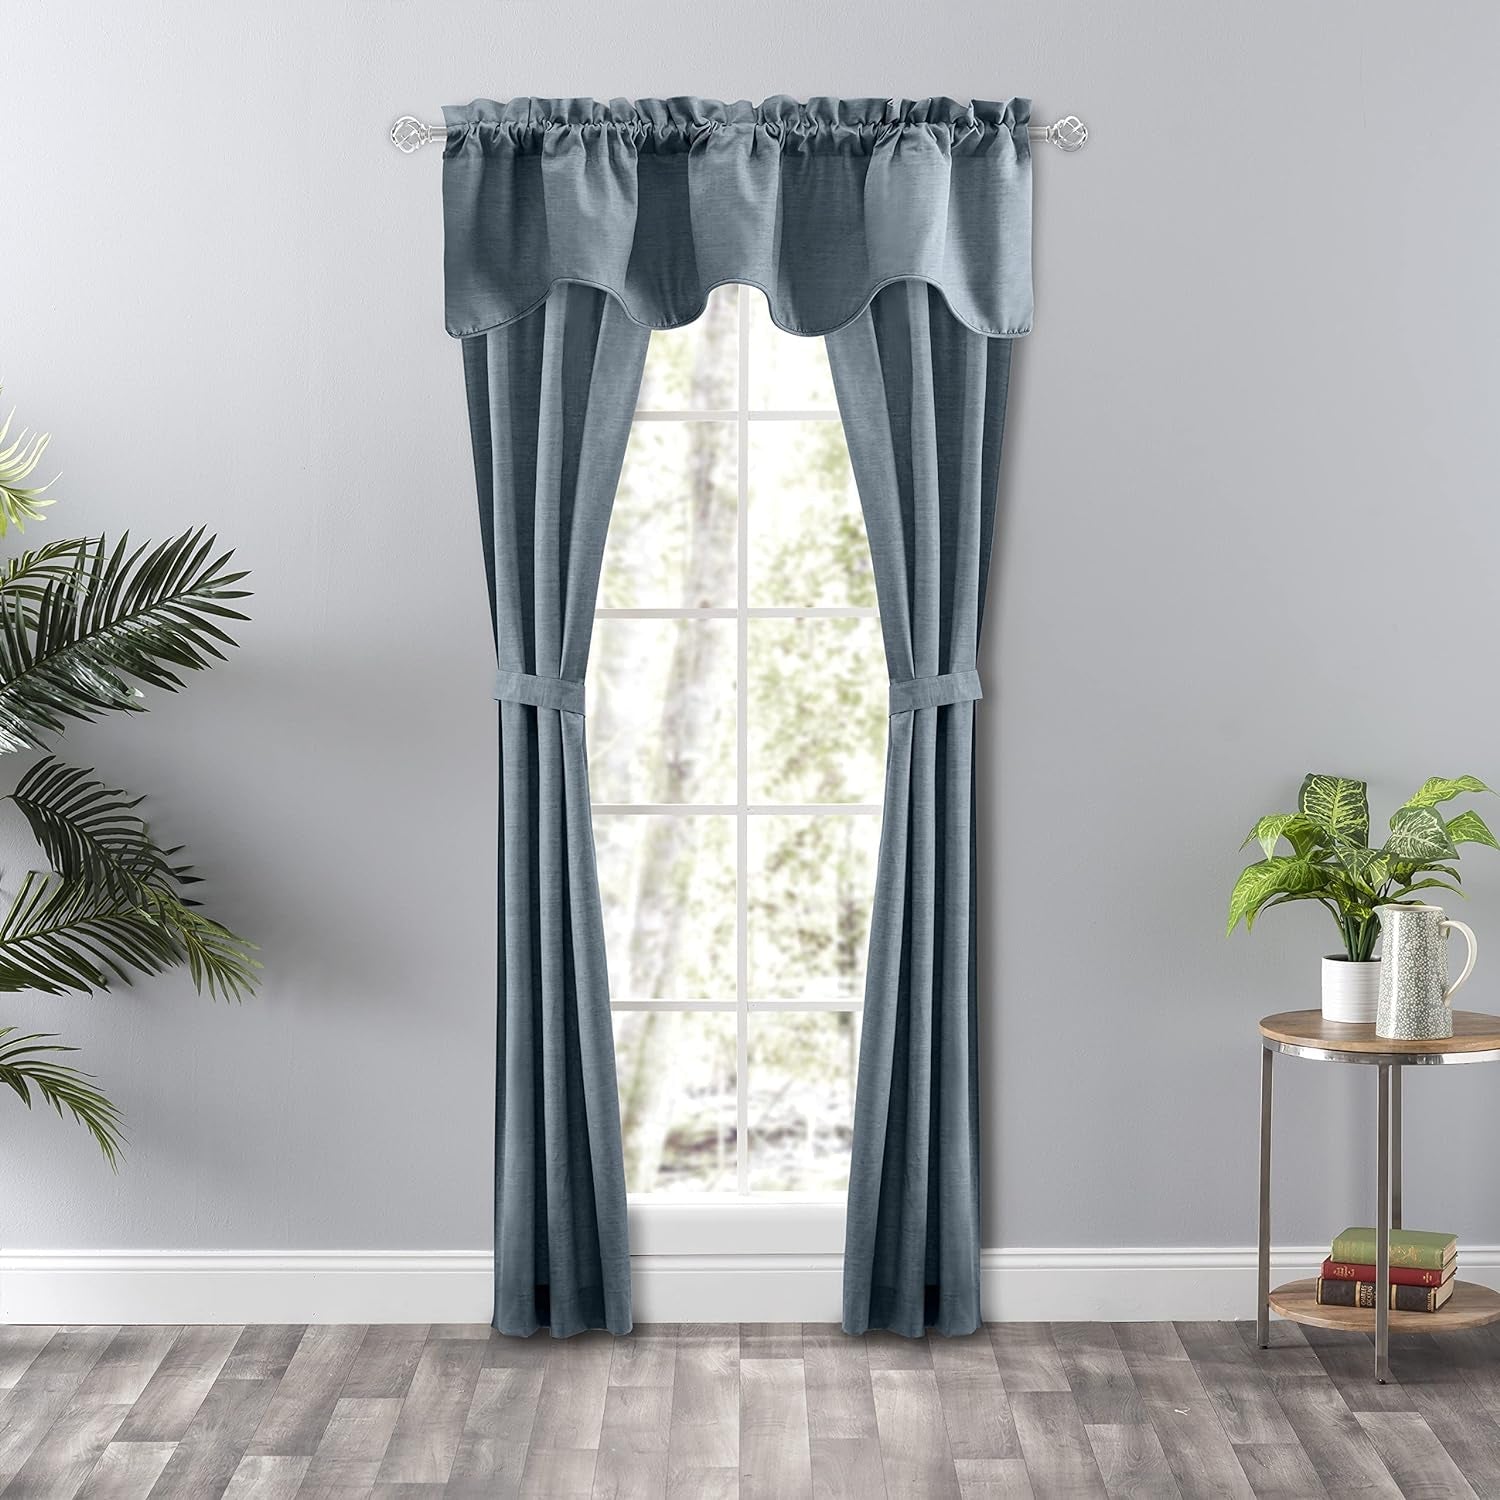 Ellis Curtain Lisa Solid 58" X 15" Lined Scallop Valance, Dusty Blue